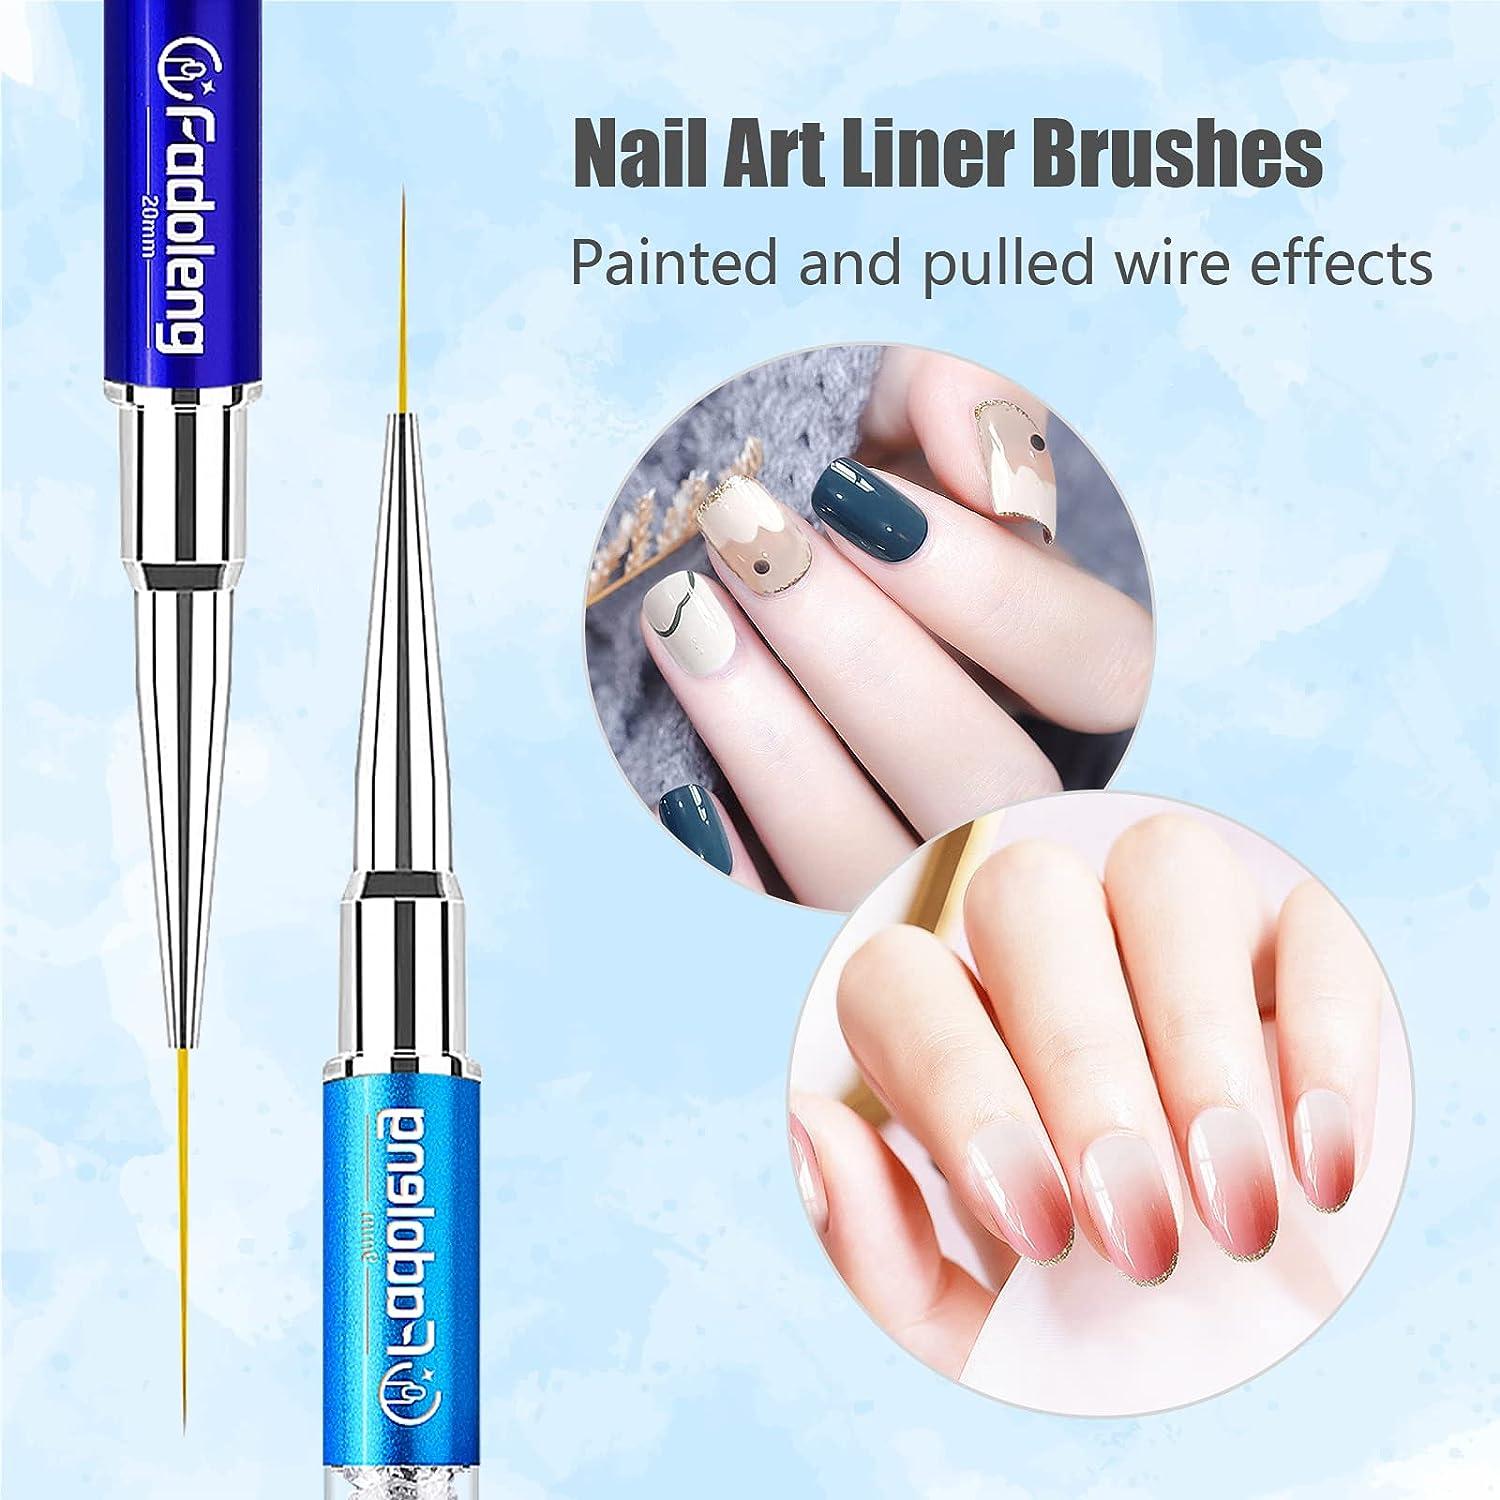 Double Head Nail Brush 9mm&11mm Drawing Liner Brush Painting Pen